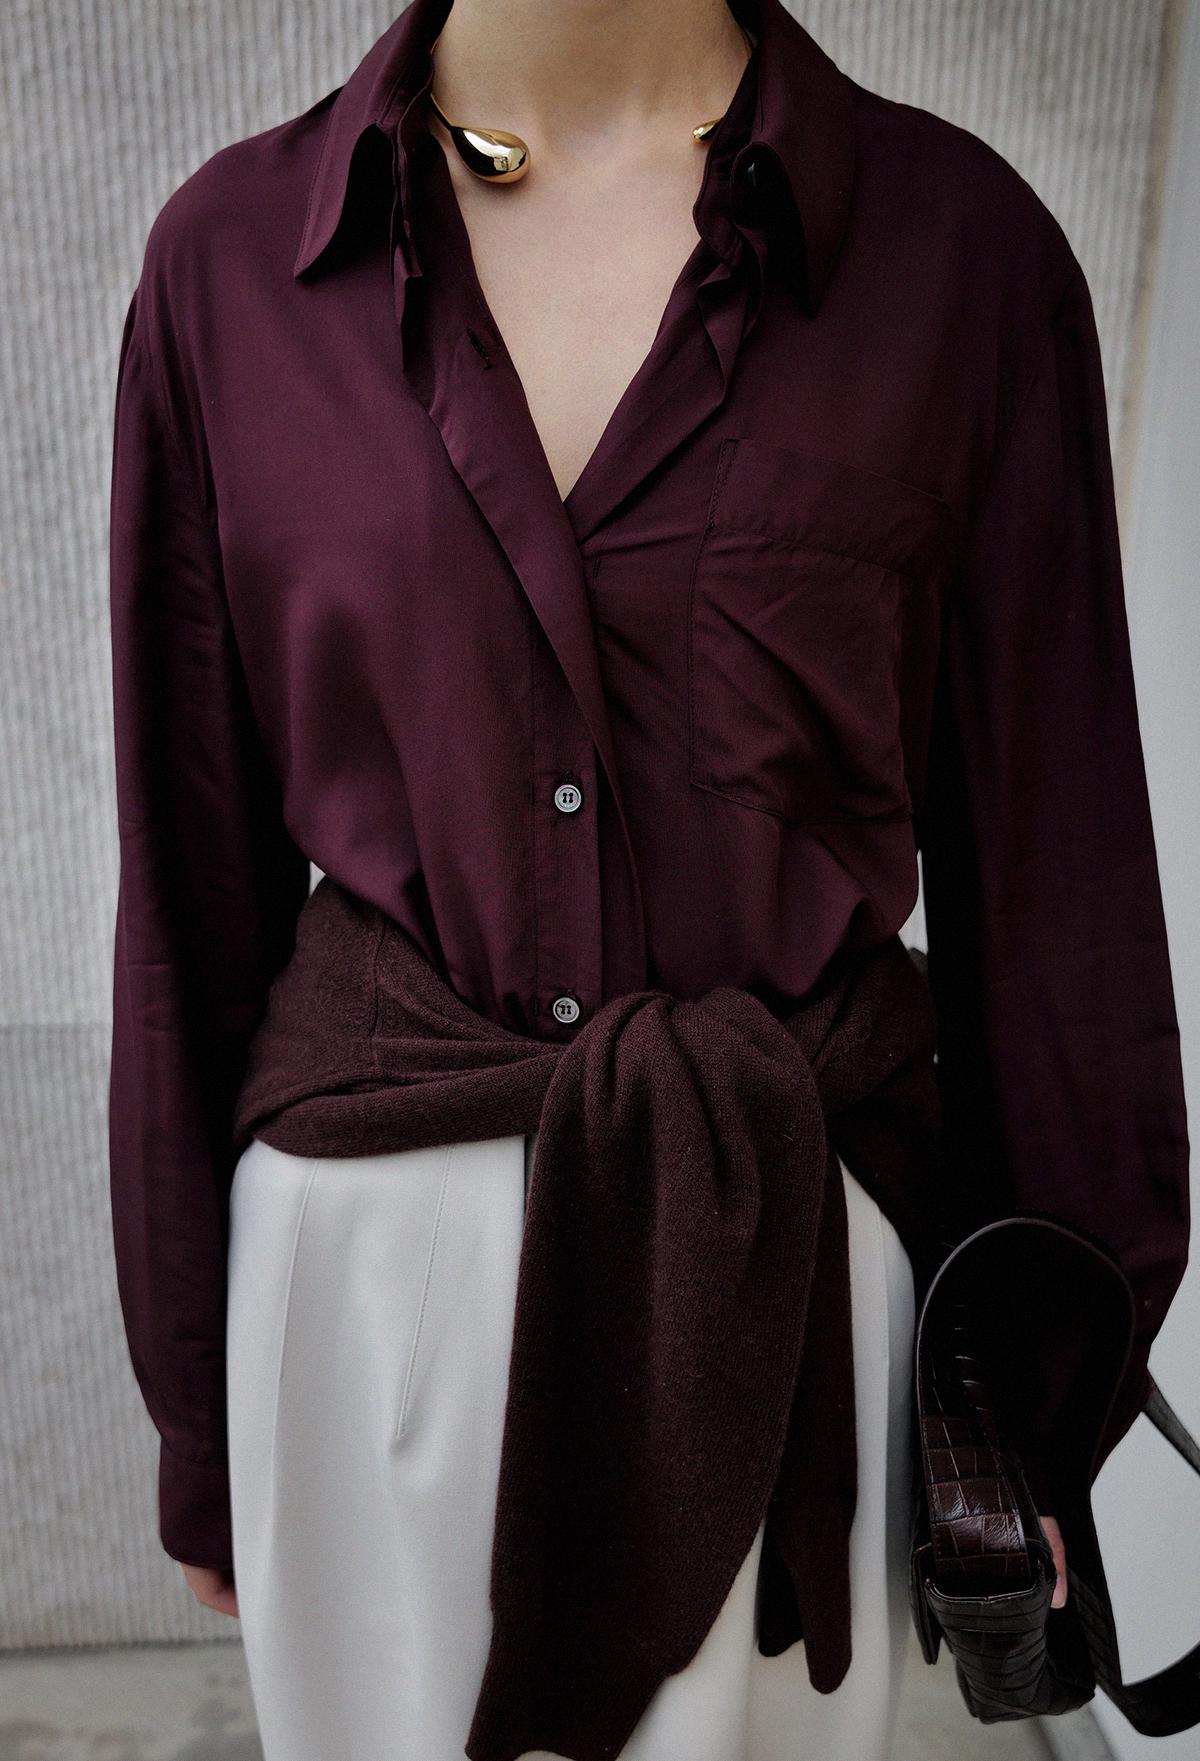 Double Placket Shirt In Brown